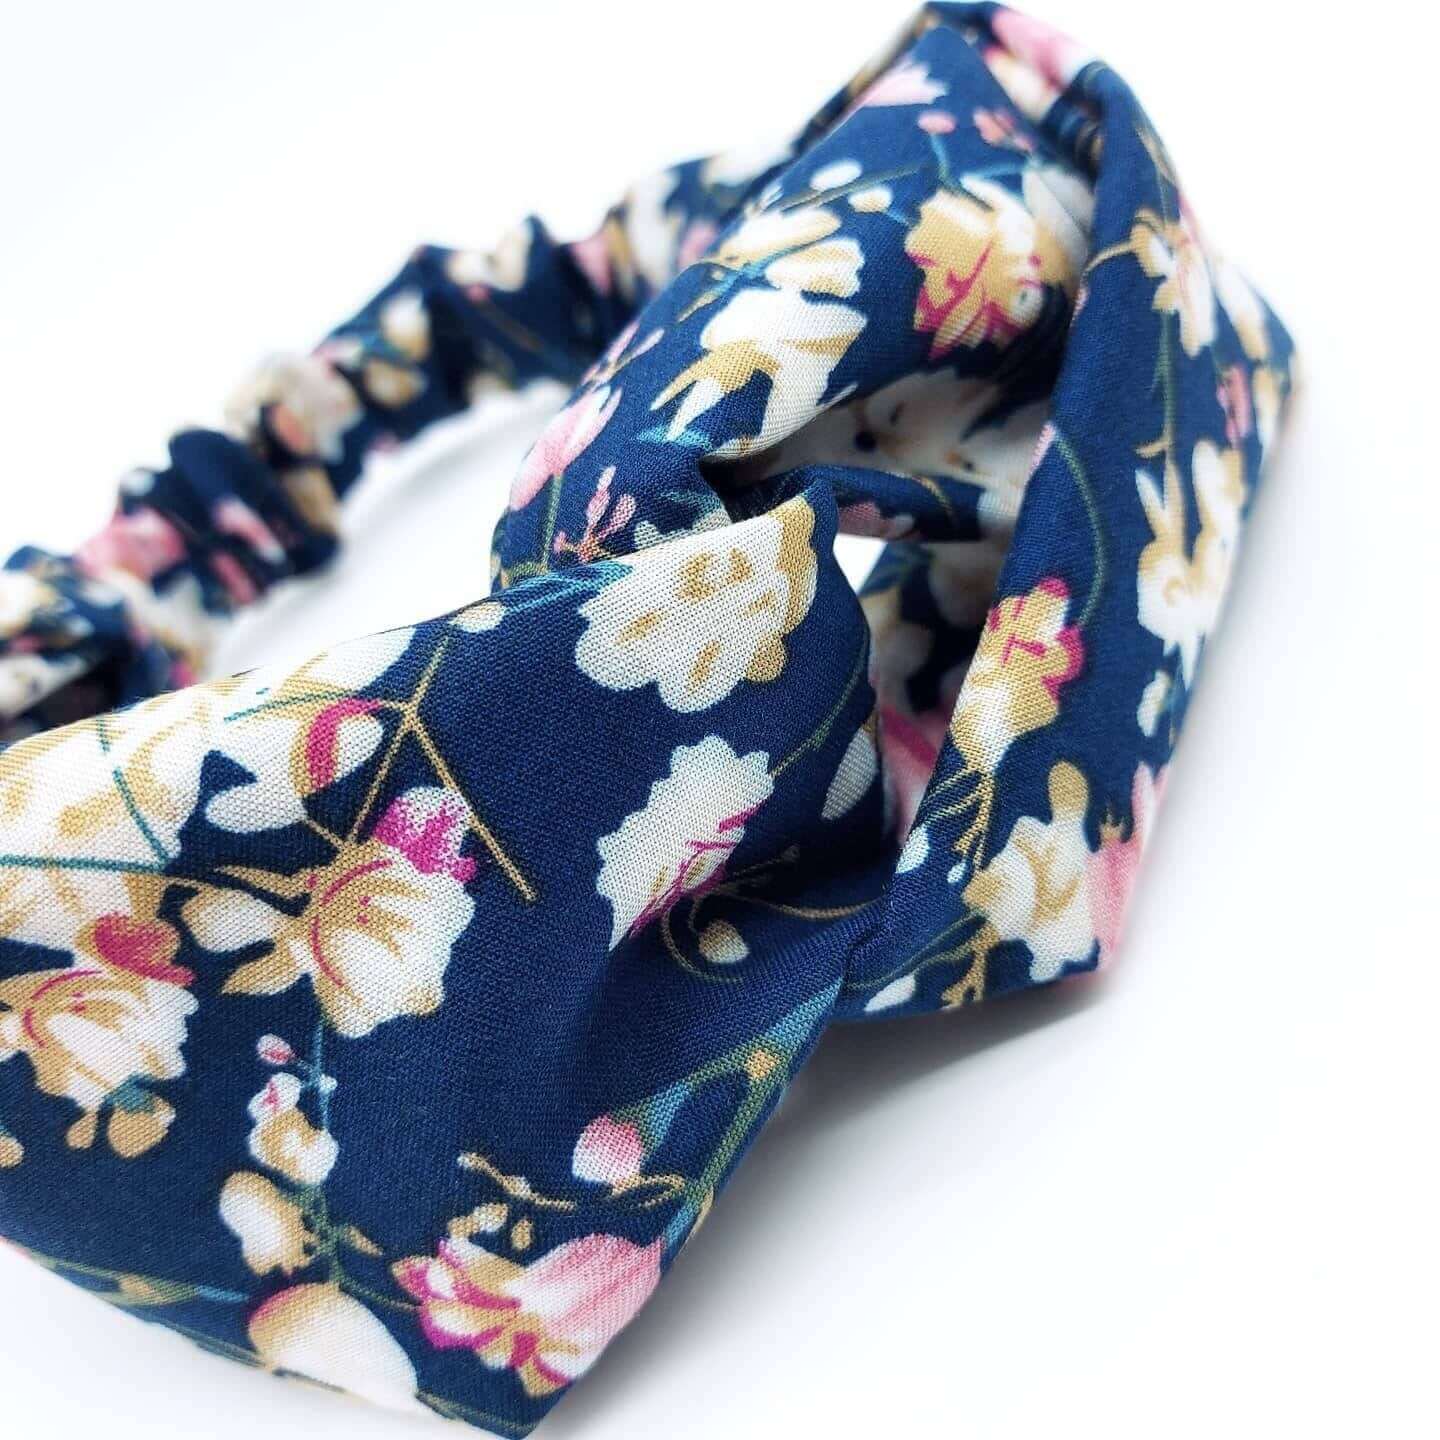 A soft, navy floral, turban twist headband with pops of pink, cream and yellow.